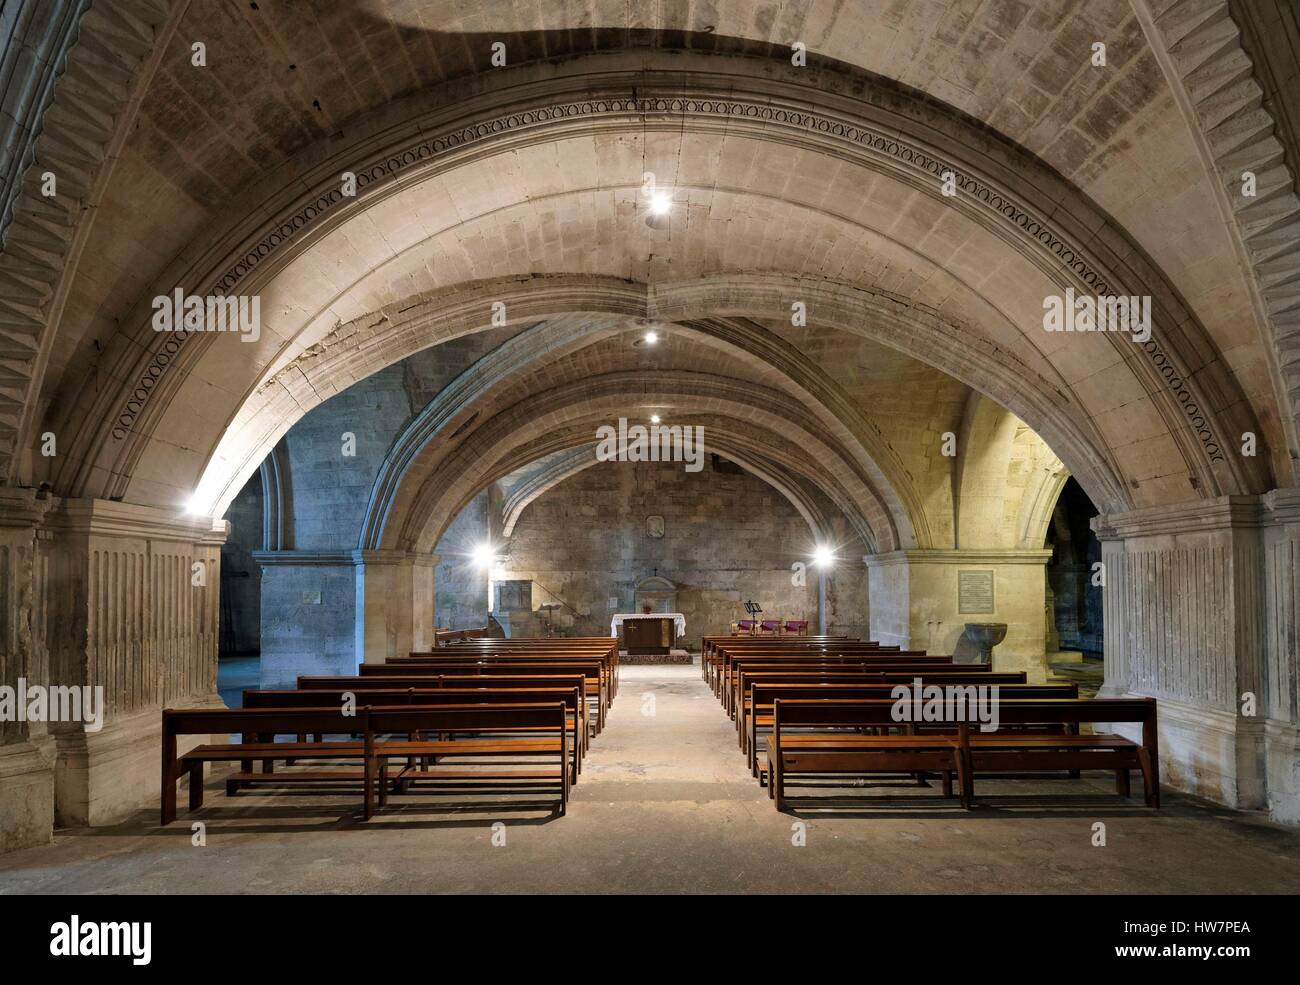 France, Gard, Saint Gilles, 12th-13th century abbey, listed as World Heritage by UNESCO under the road to St Jacques de Compostela in France, Provencal Romanesque style, the crypt Stock Photo